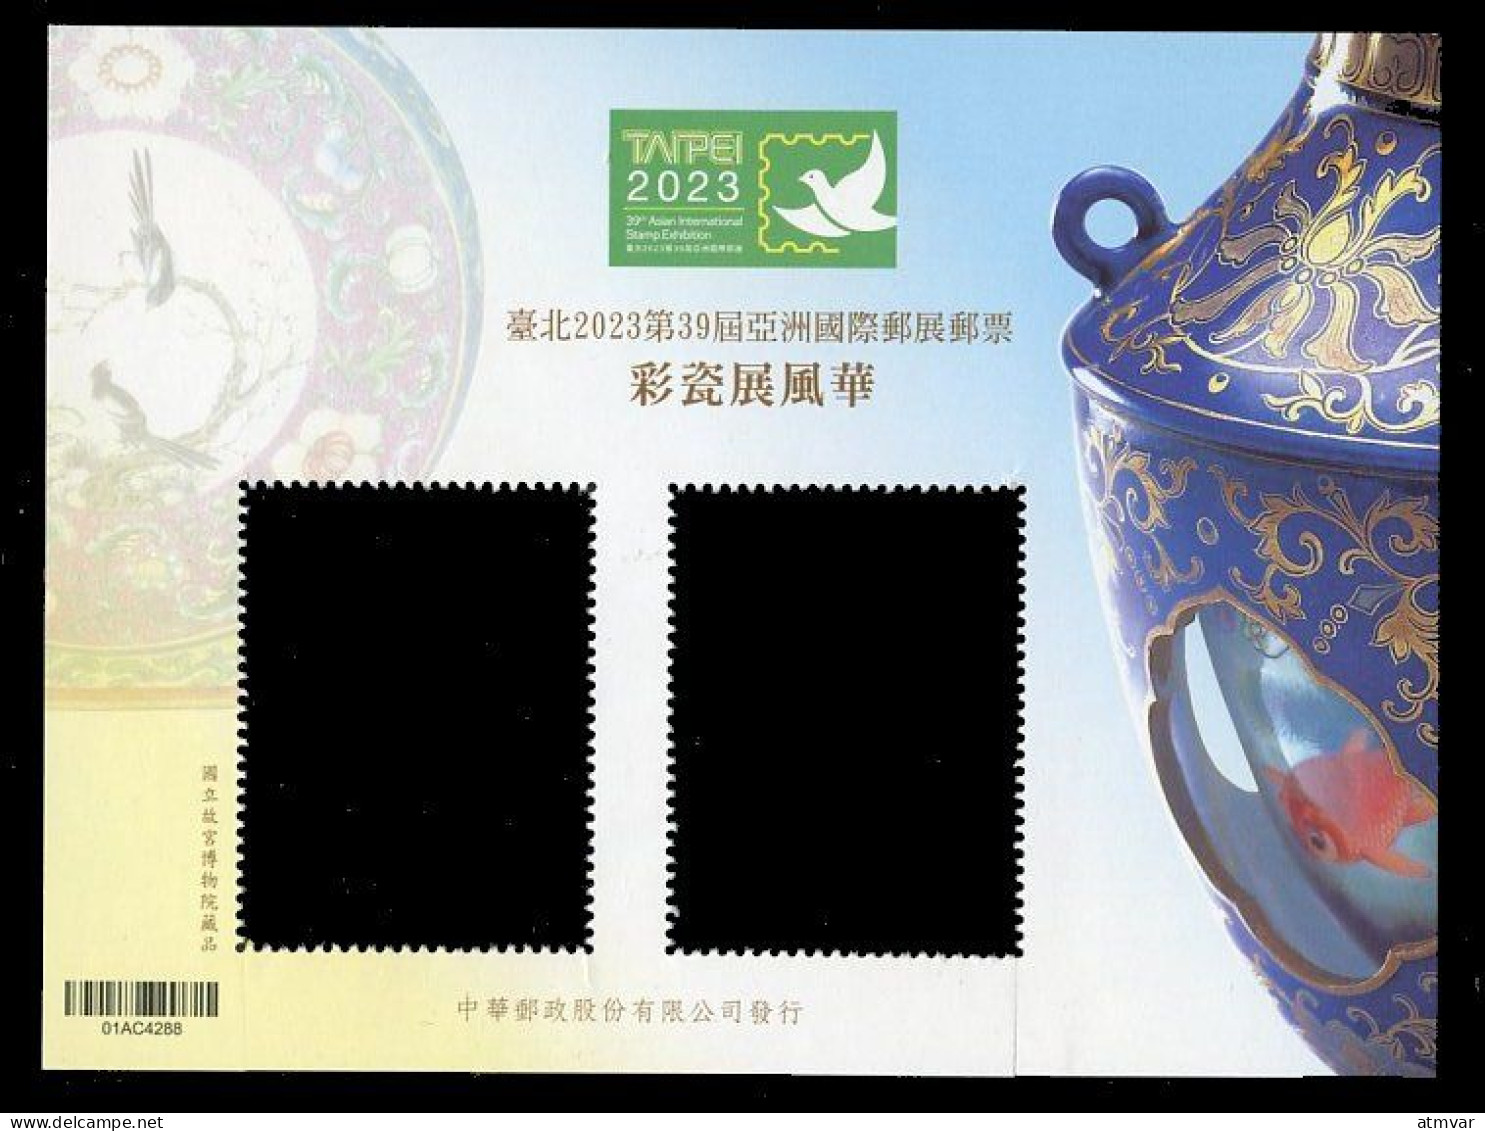 TAIWAN (2023) Cartes Maximum Cards - Taipei 2023 39th Asian Stamp Exhibition, Artistic Vases, Porcelain, Qing Dynasty - Porcelain